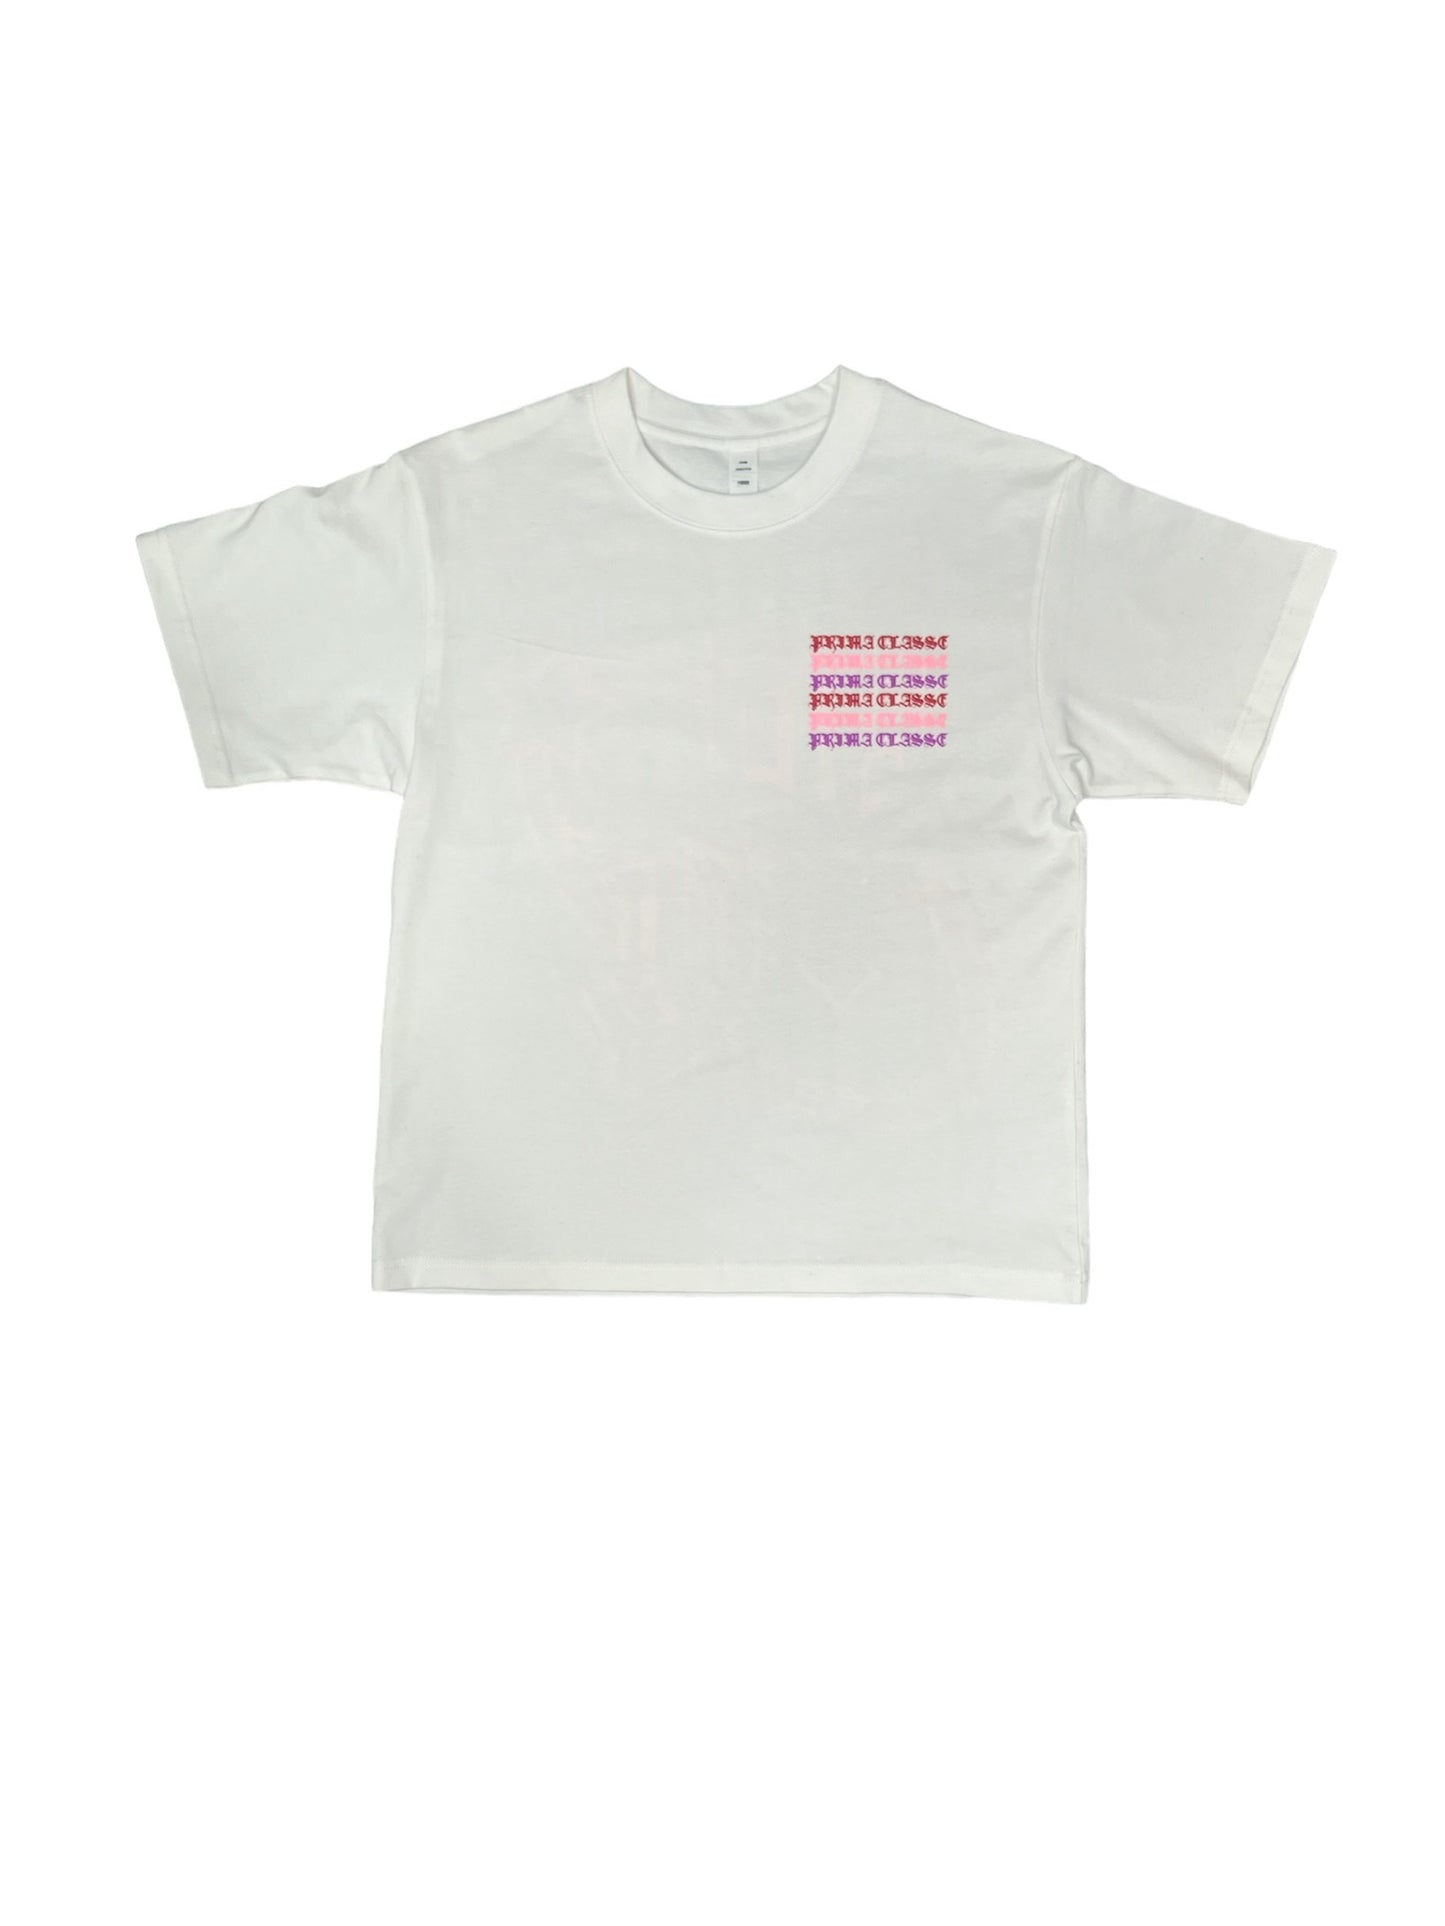 WHITE HOLOGRAPHIC T-SHIRT